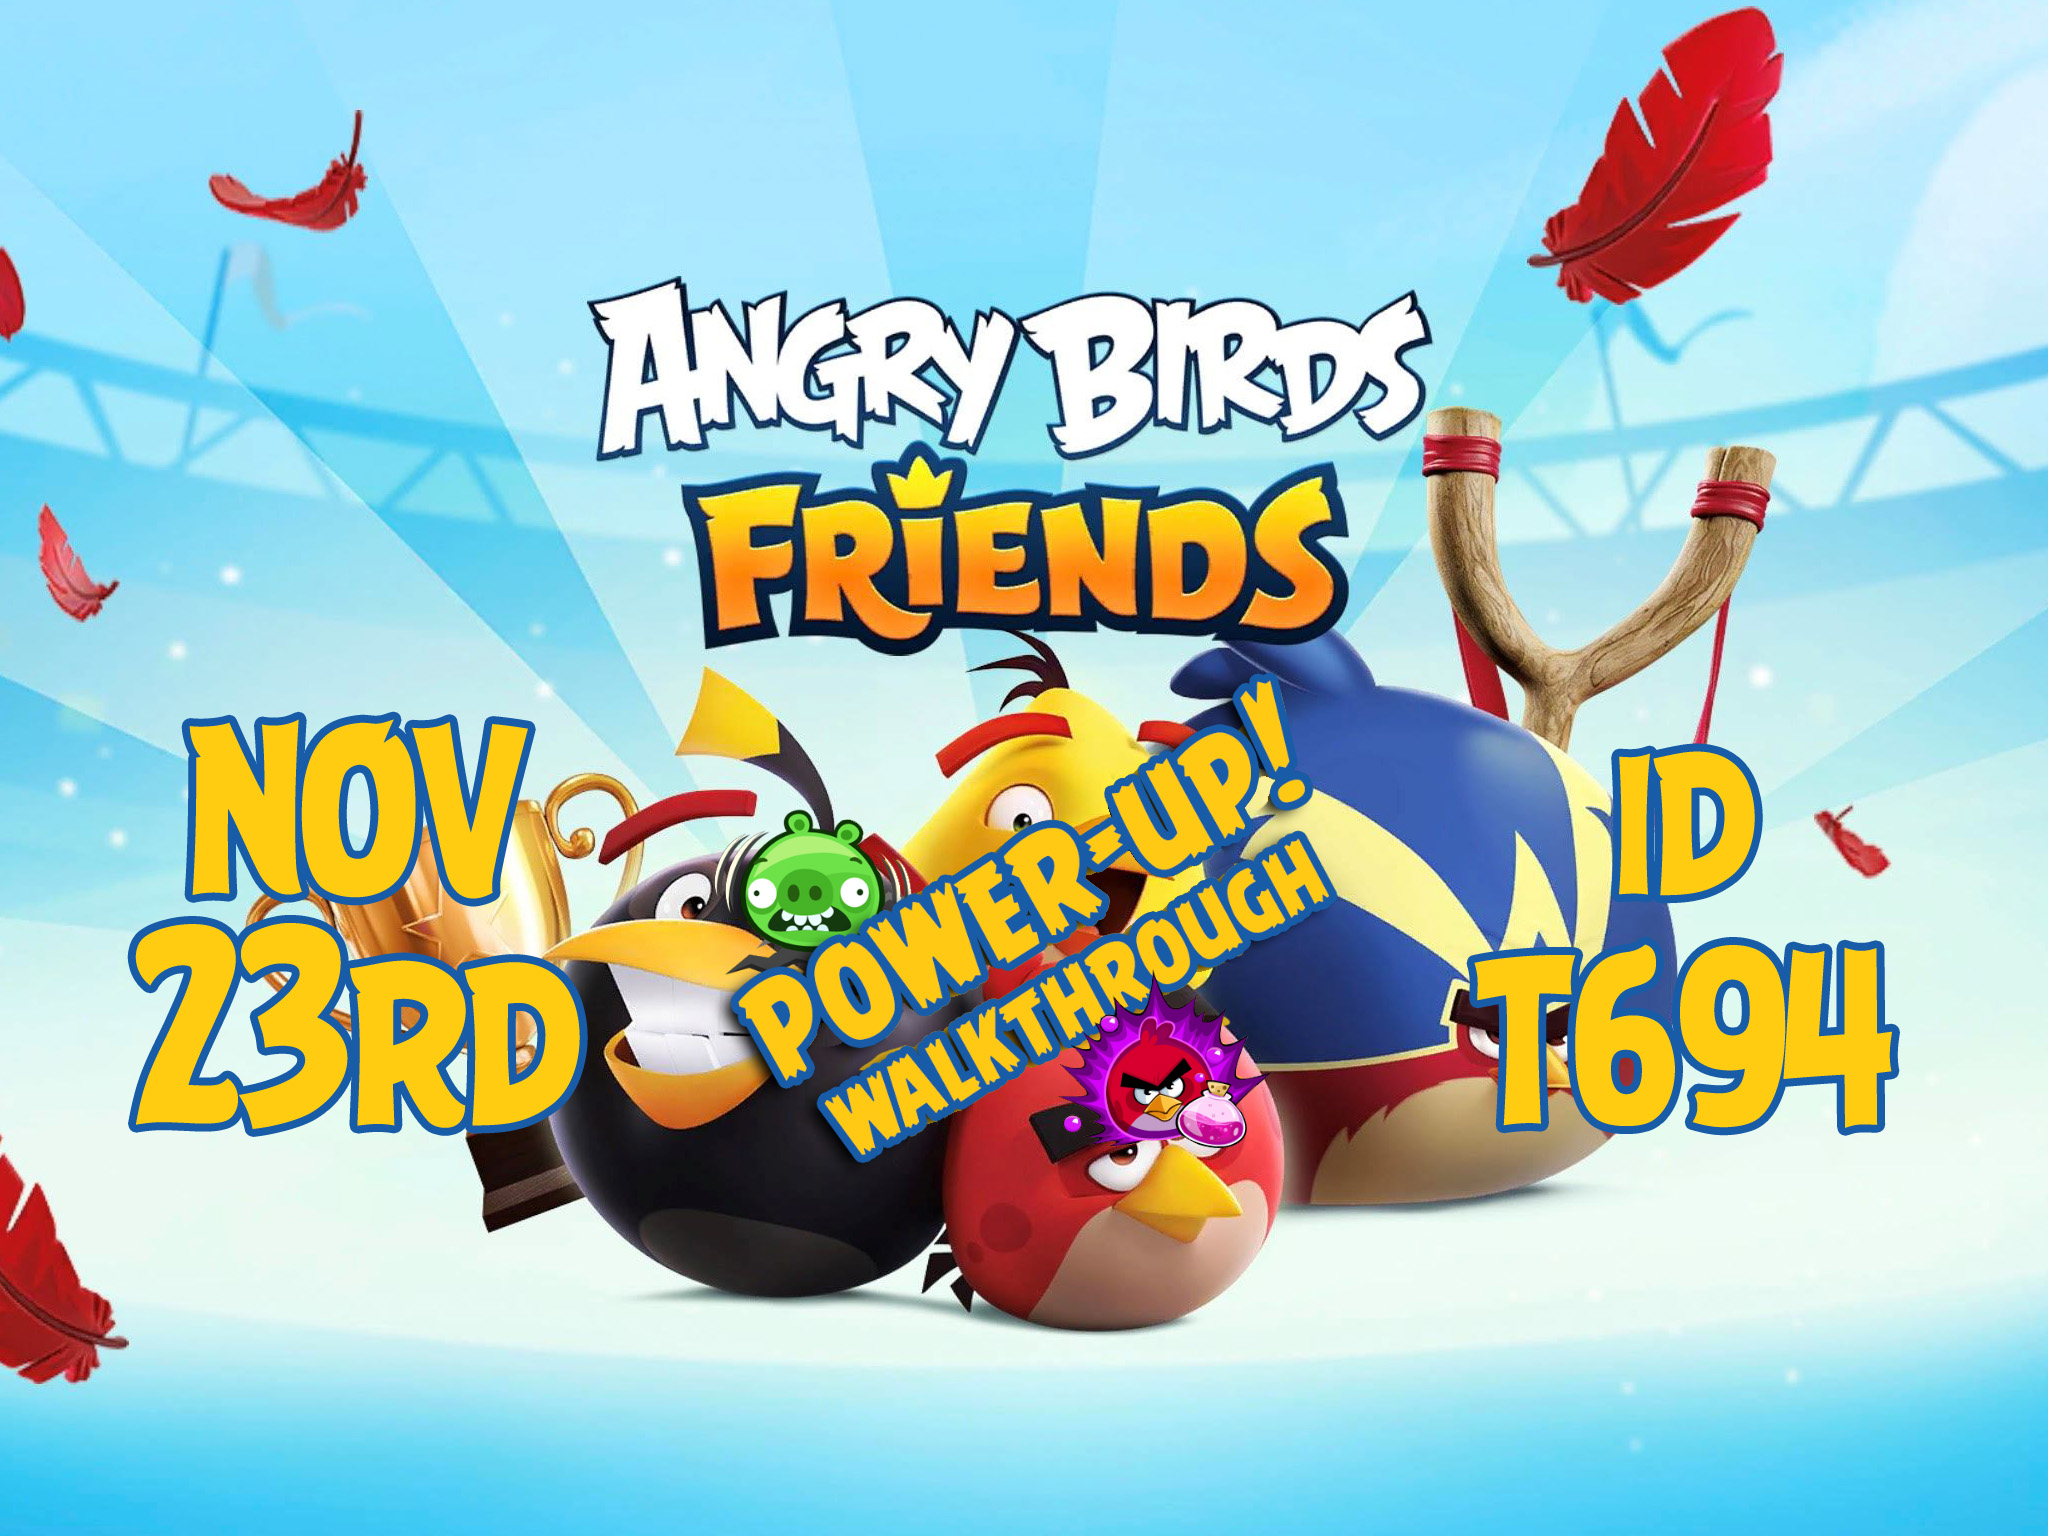 Angry-Birds-Friends-Tournament-T694-Feature-Image-PU